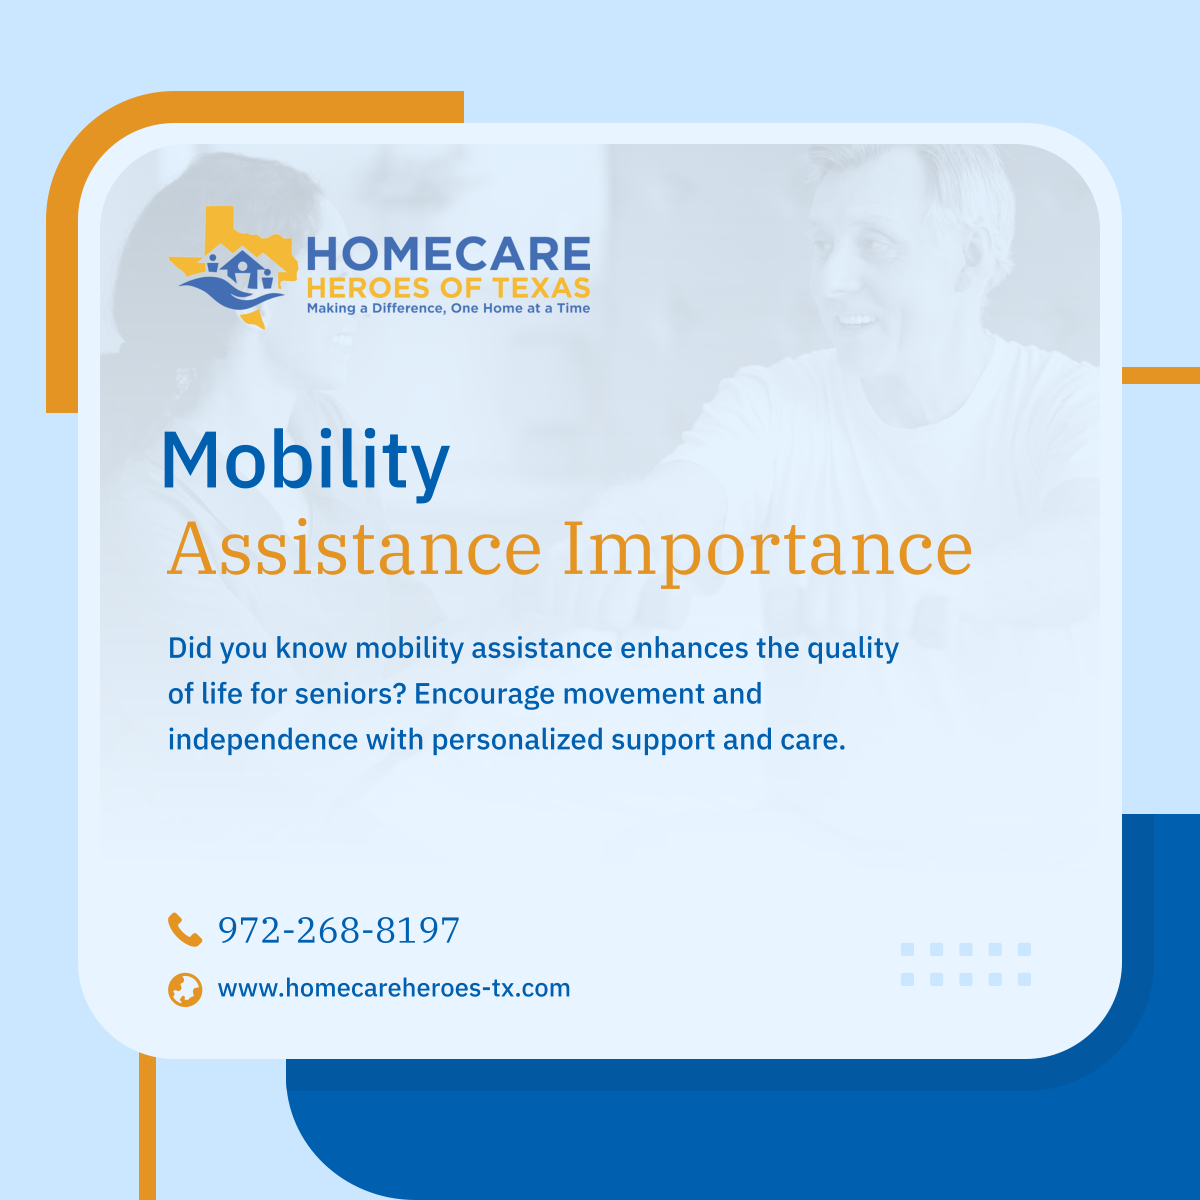 Learn about the importance of mobility assistance for seniors' well-being. Reach out for tailored care solutions. 

#HomeCare #GarlandTX #MobilityAssistance #QualityOfLife #SeniorHealth